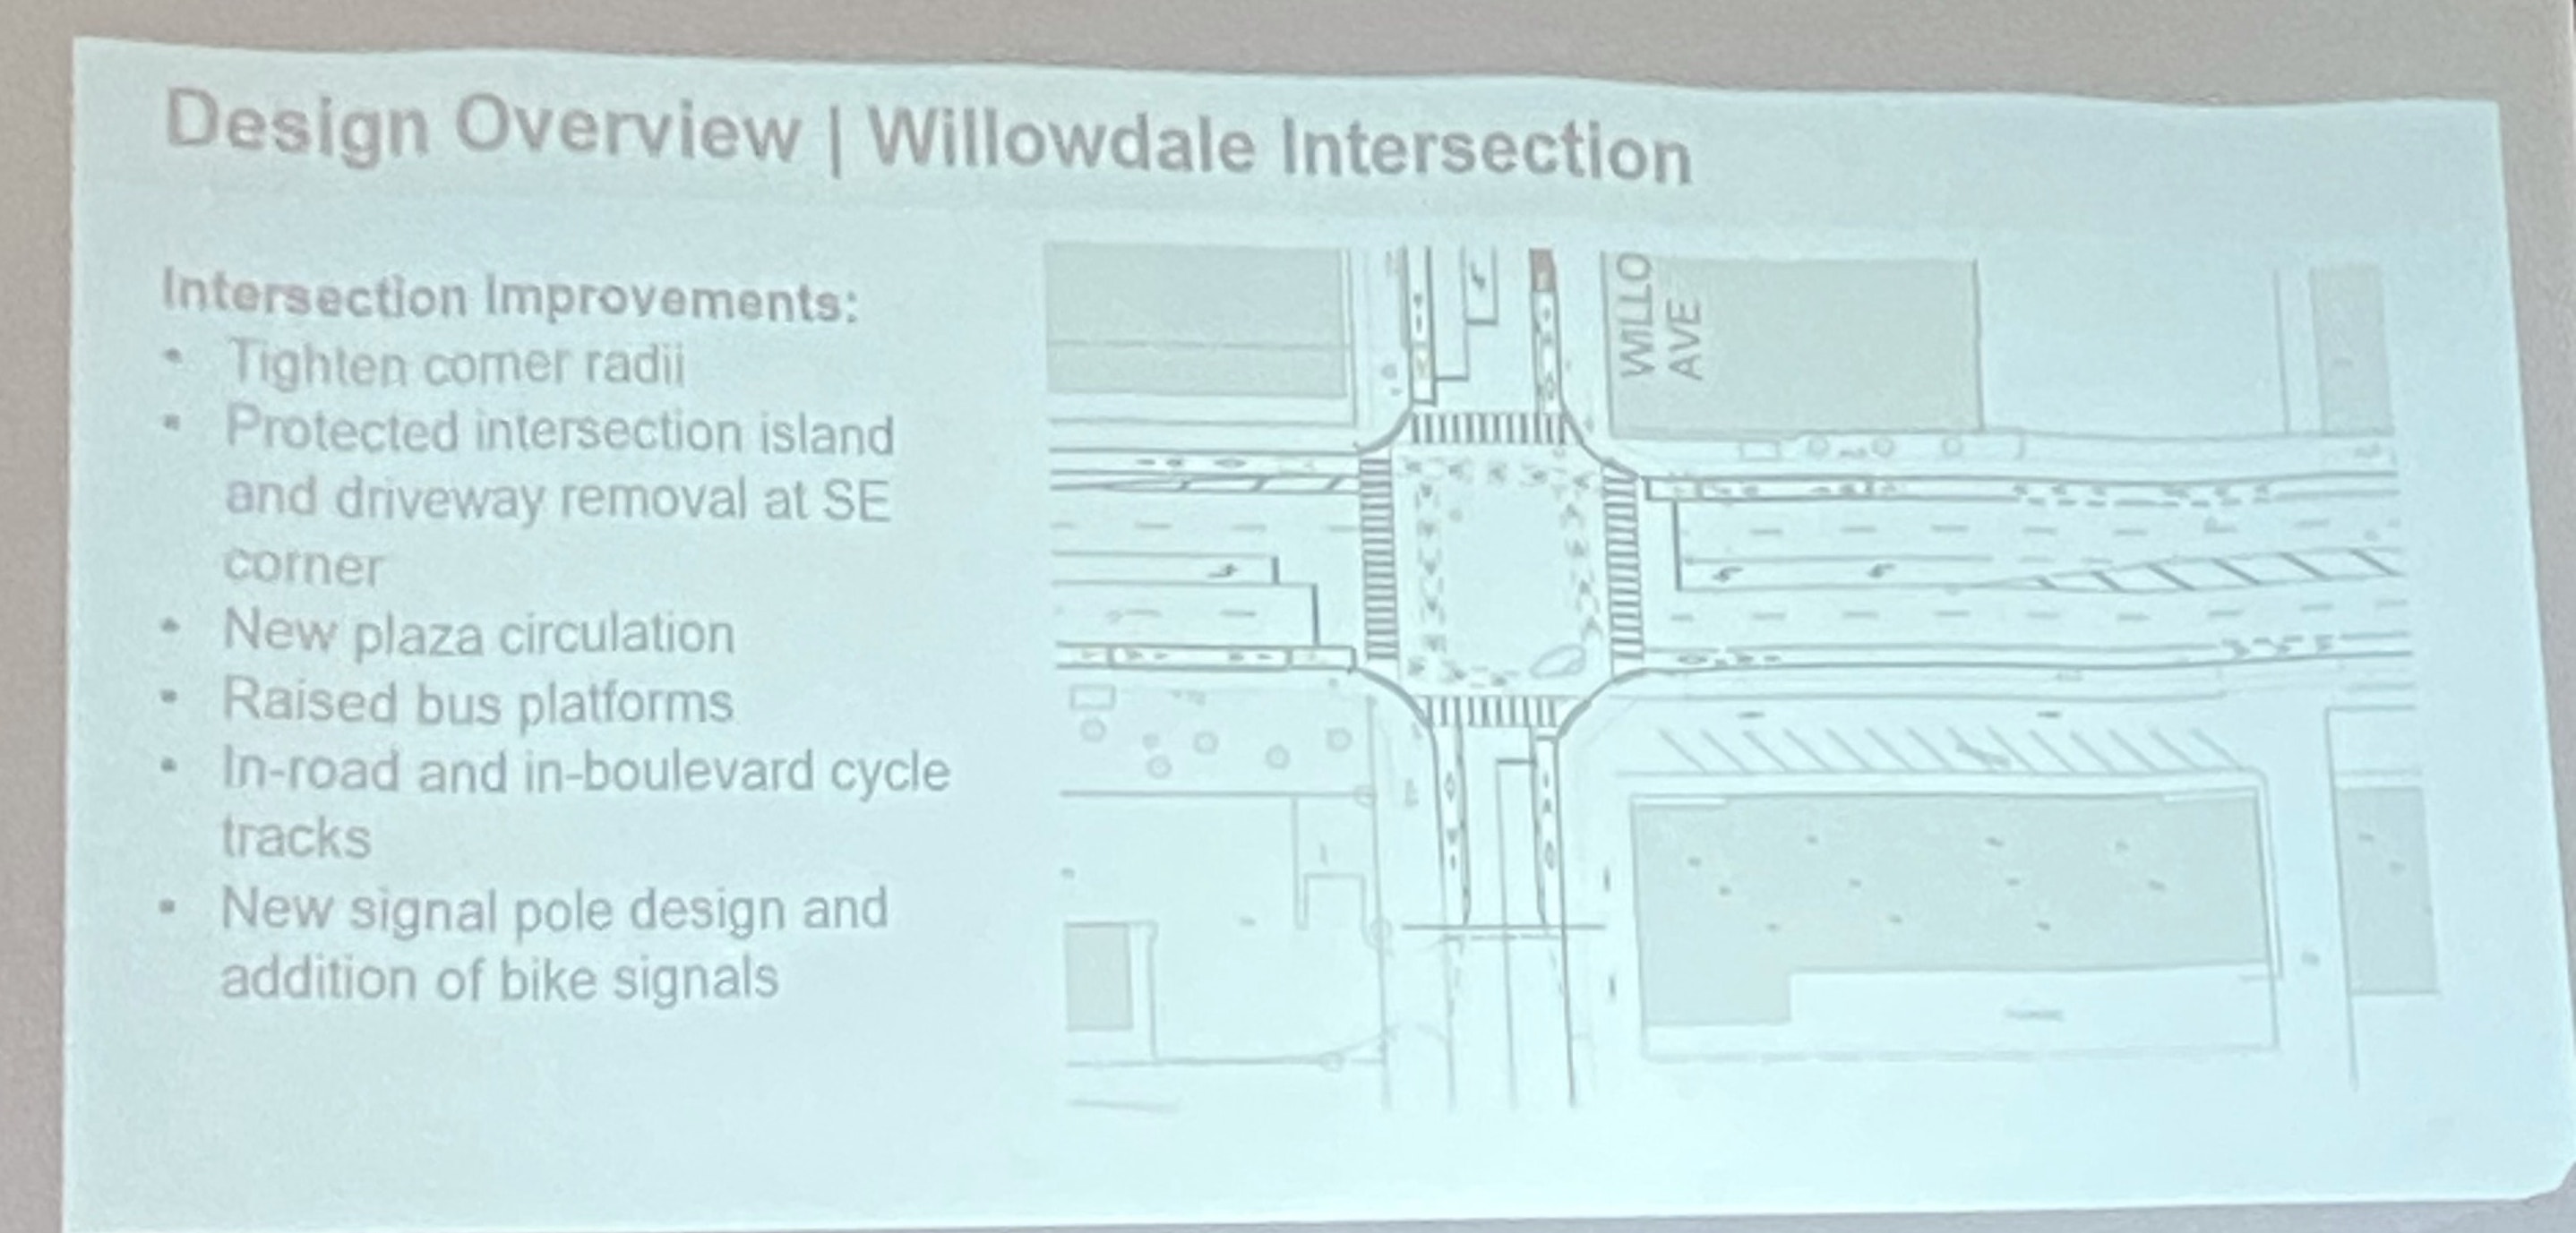 Overview of the changes at the Willowdale and Sheppard intersection